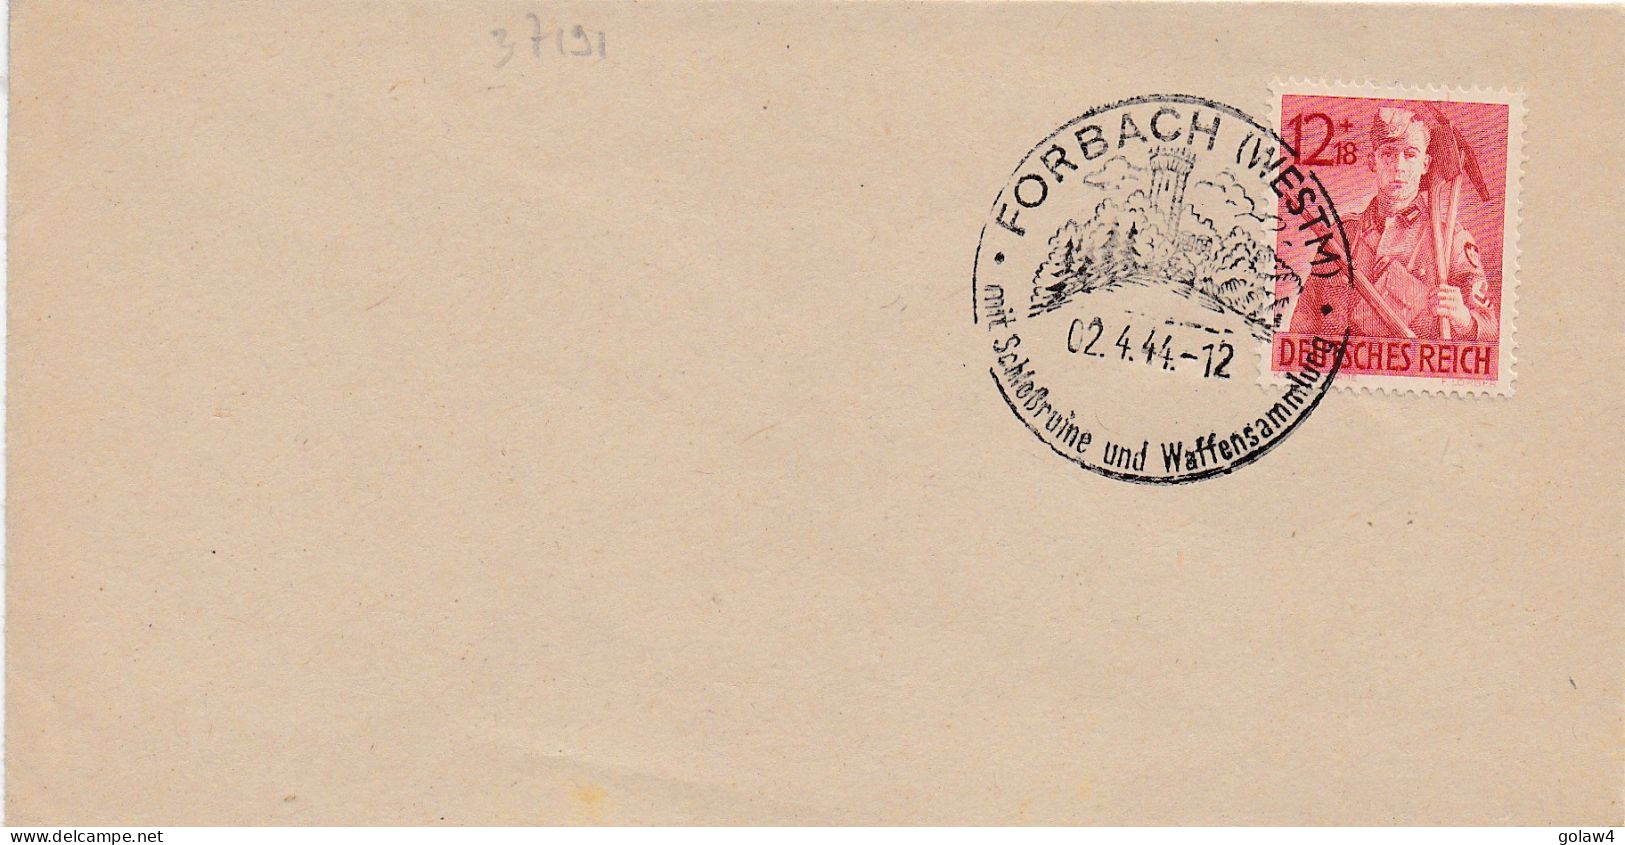 37191# LETTRE Obl FORBACH WESTMARK MIT SCHLOSSRUINE UND WAFFENSAMMLUNG 2 Avril 1944 MOSELLE - Covers & Documents